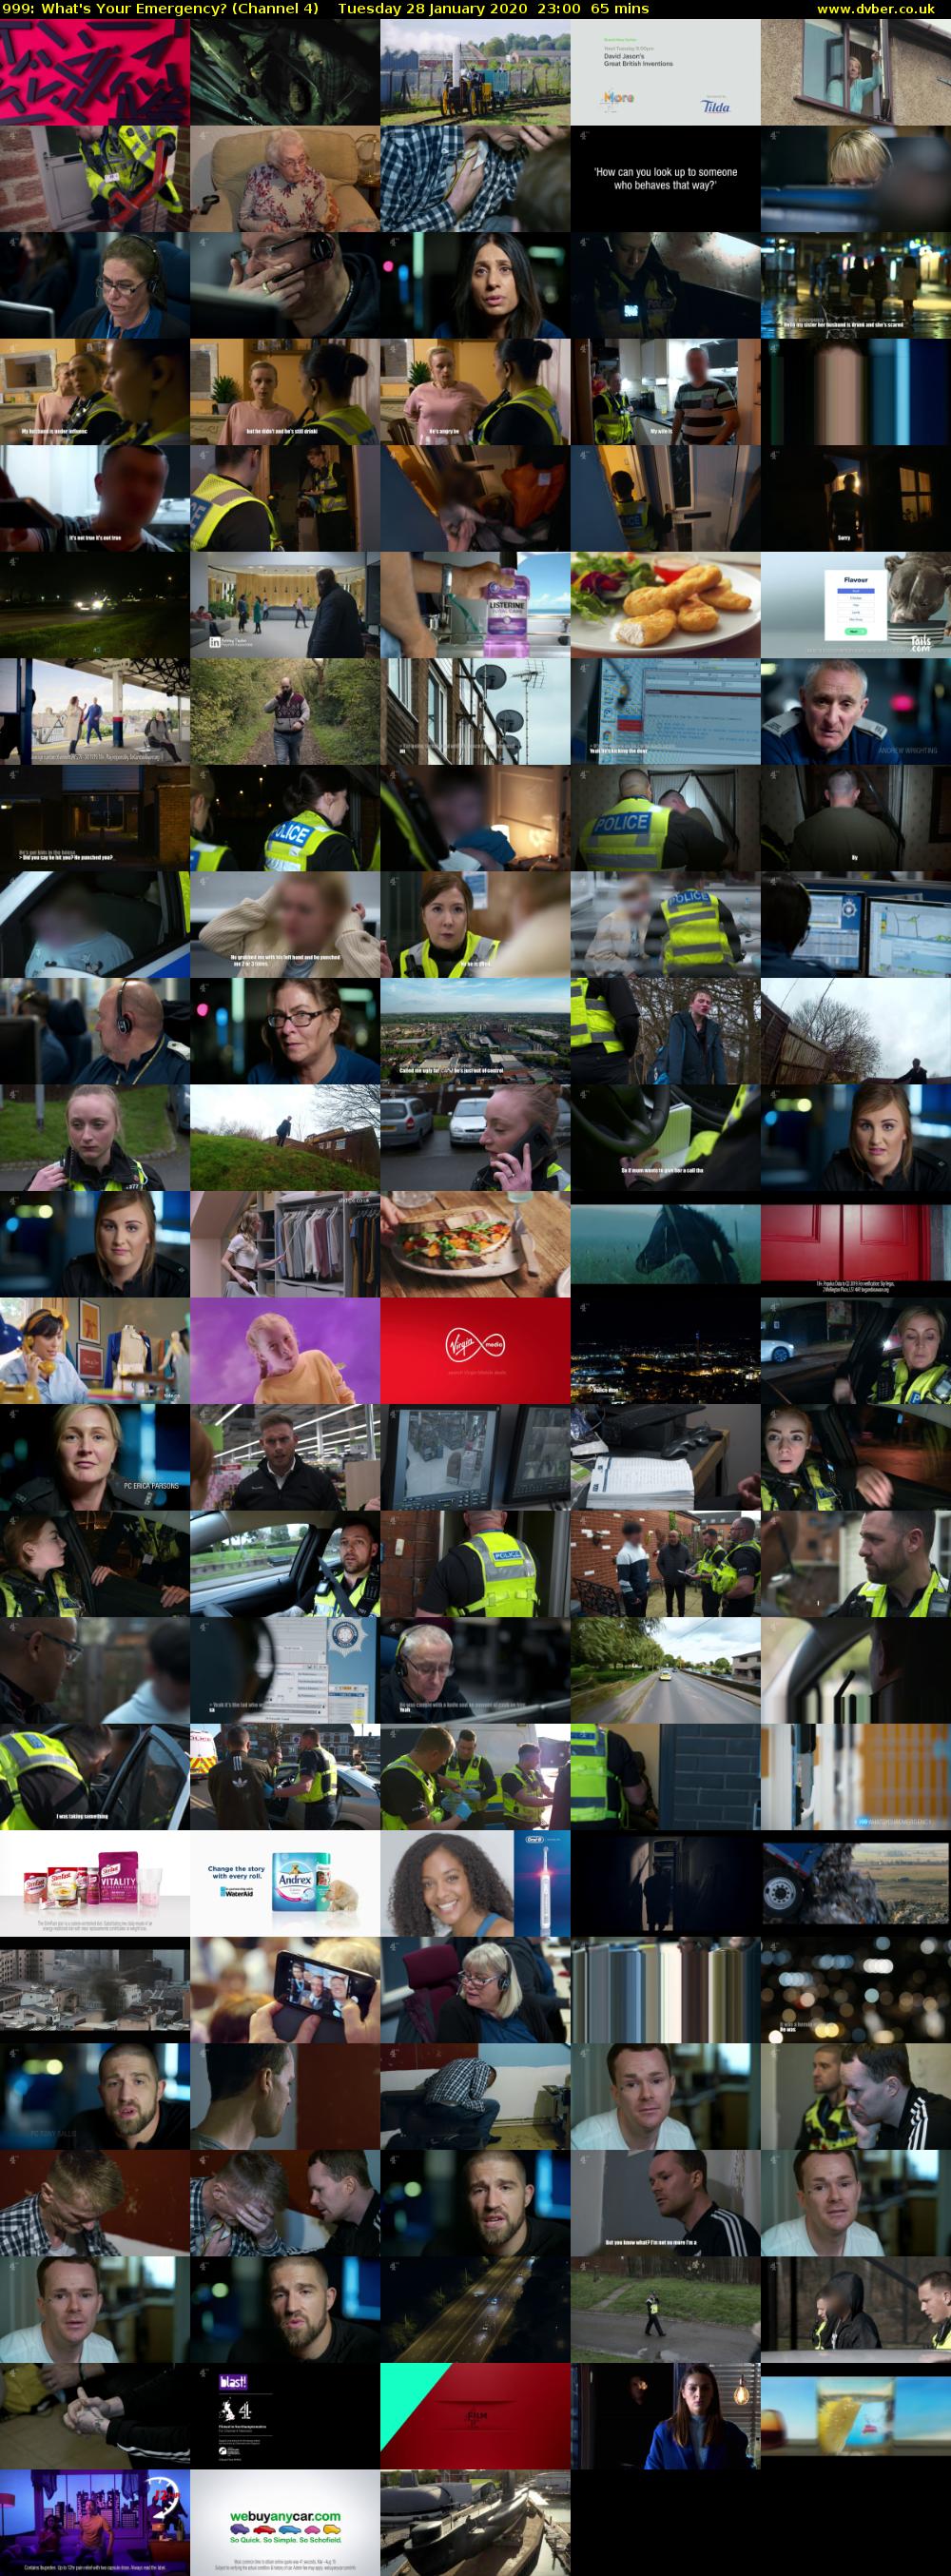 999: What's Your Emergency? (Channel 4) Tuesday 28 January 2020 23:00 - 00:05